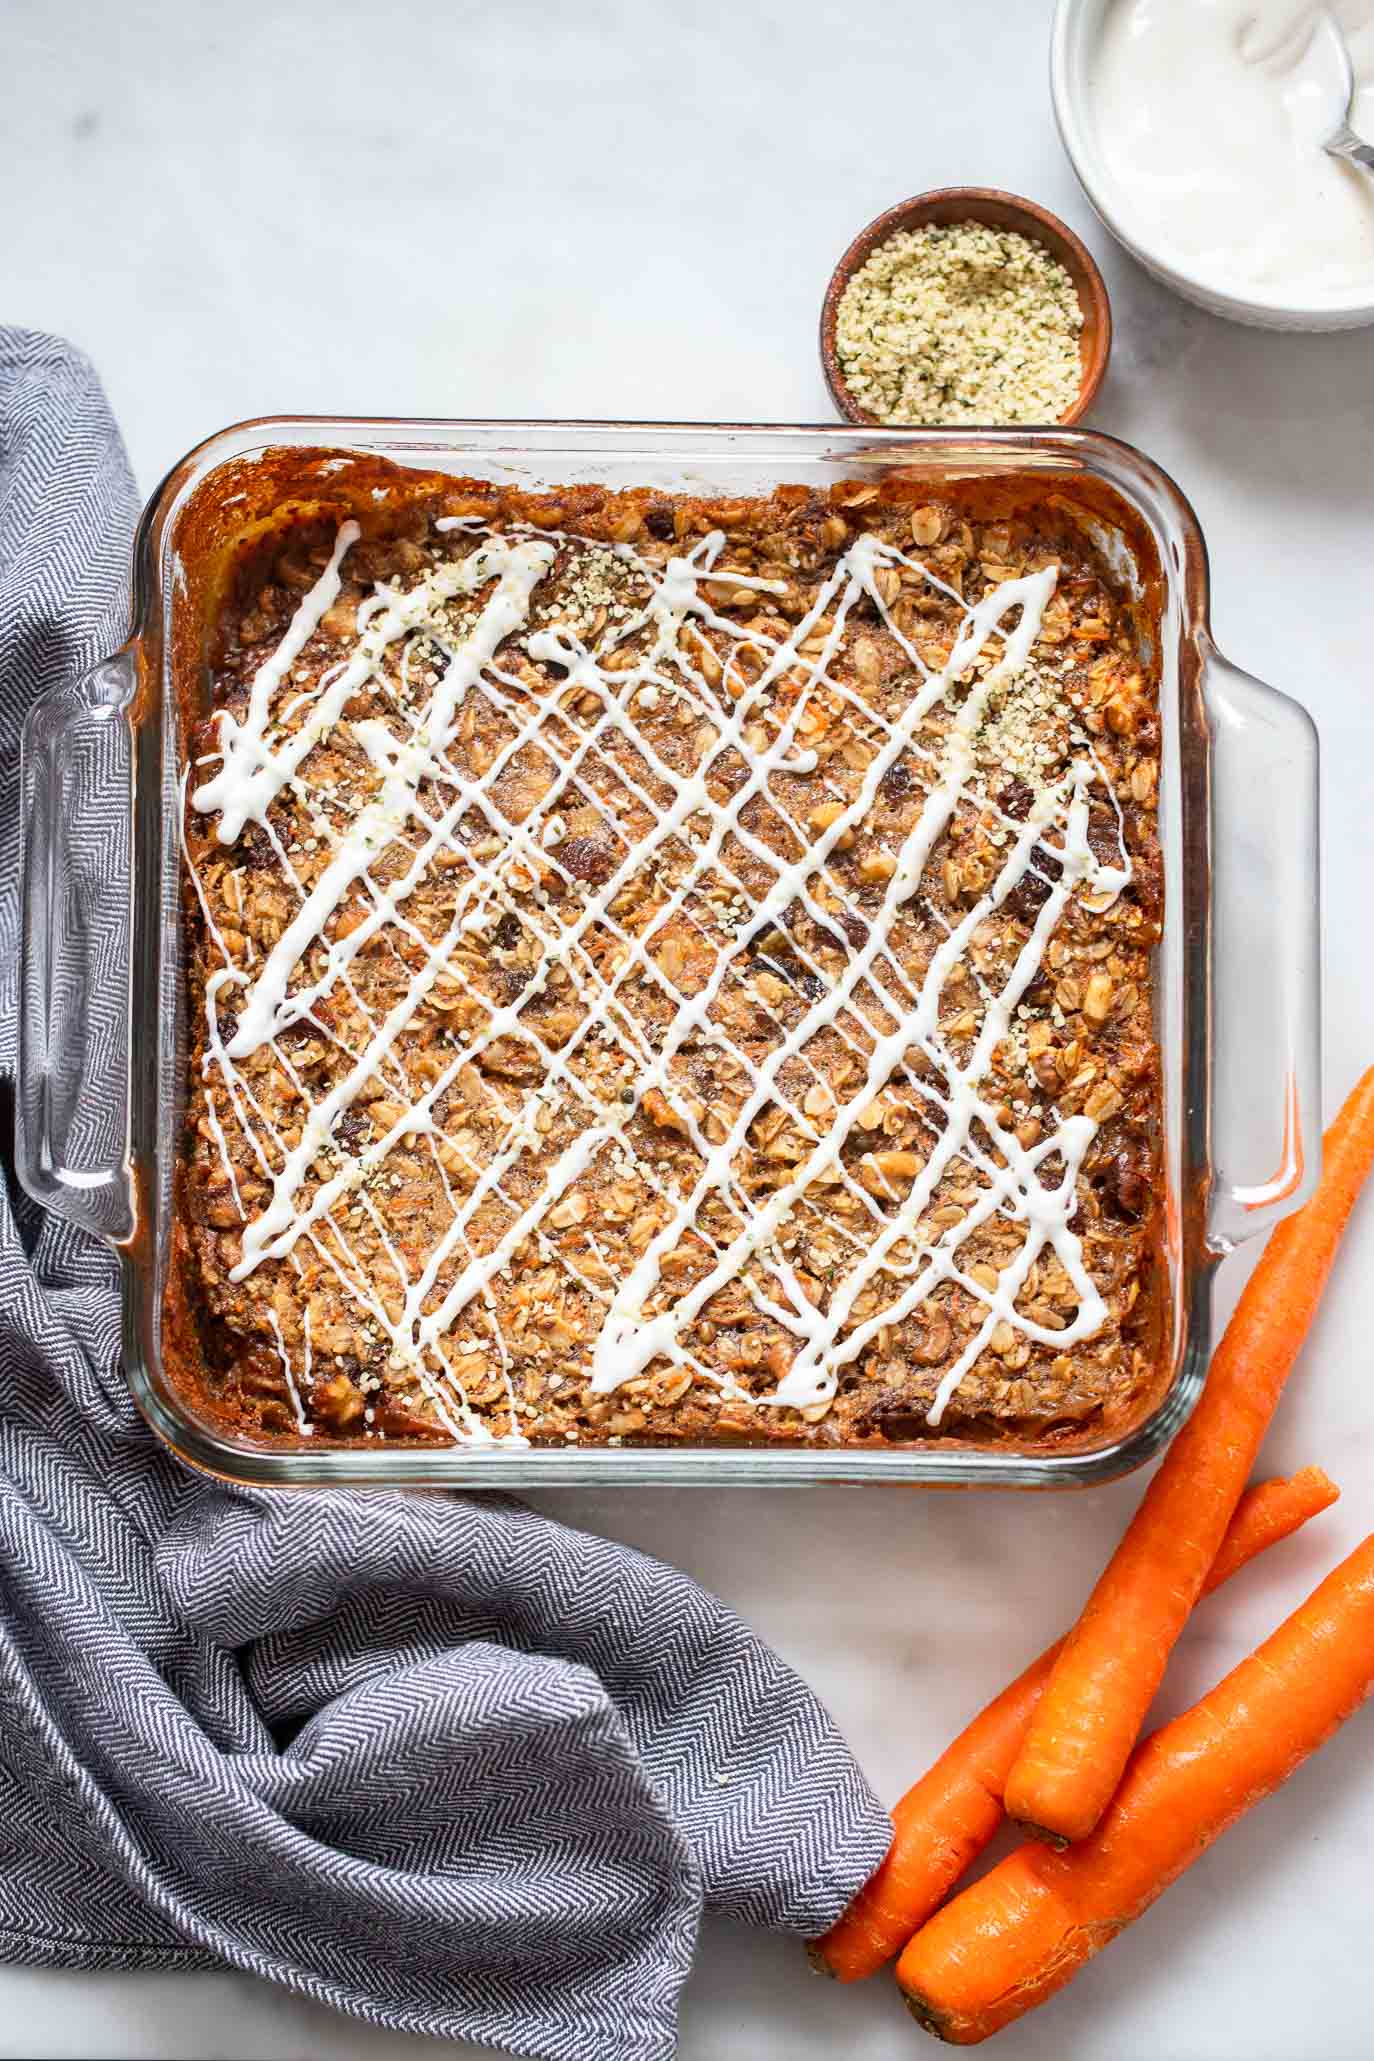 baked carrot cake baked oatmeal in glass dish